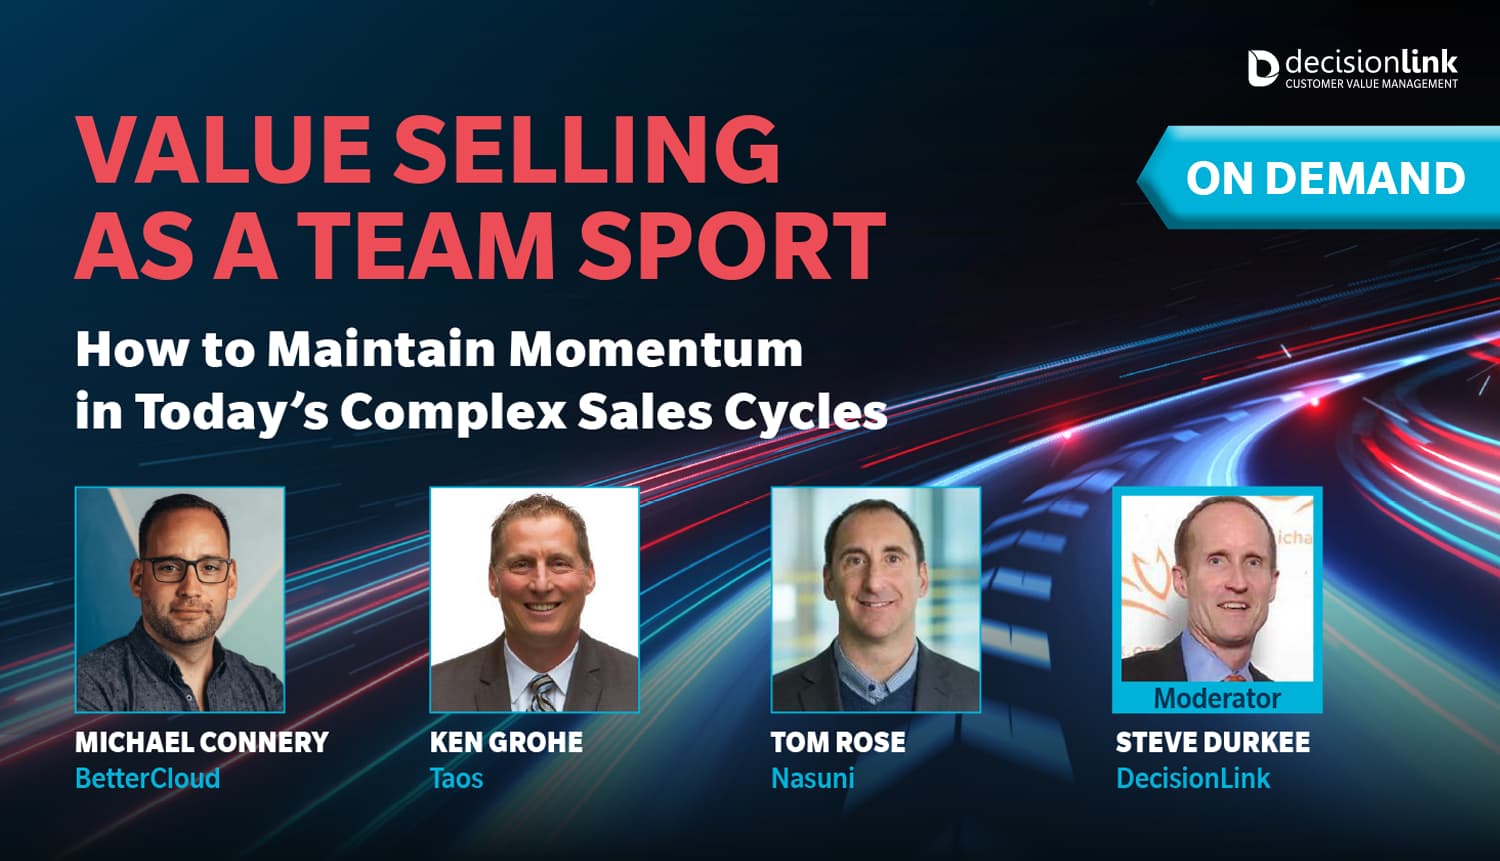 Value Selling as a Team Sport